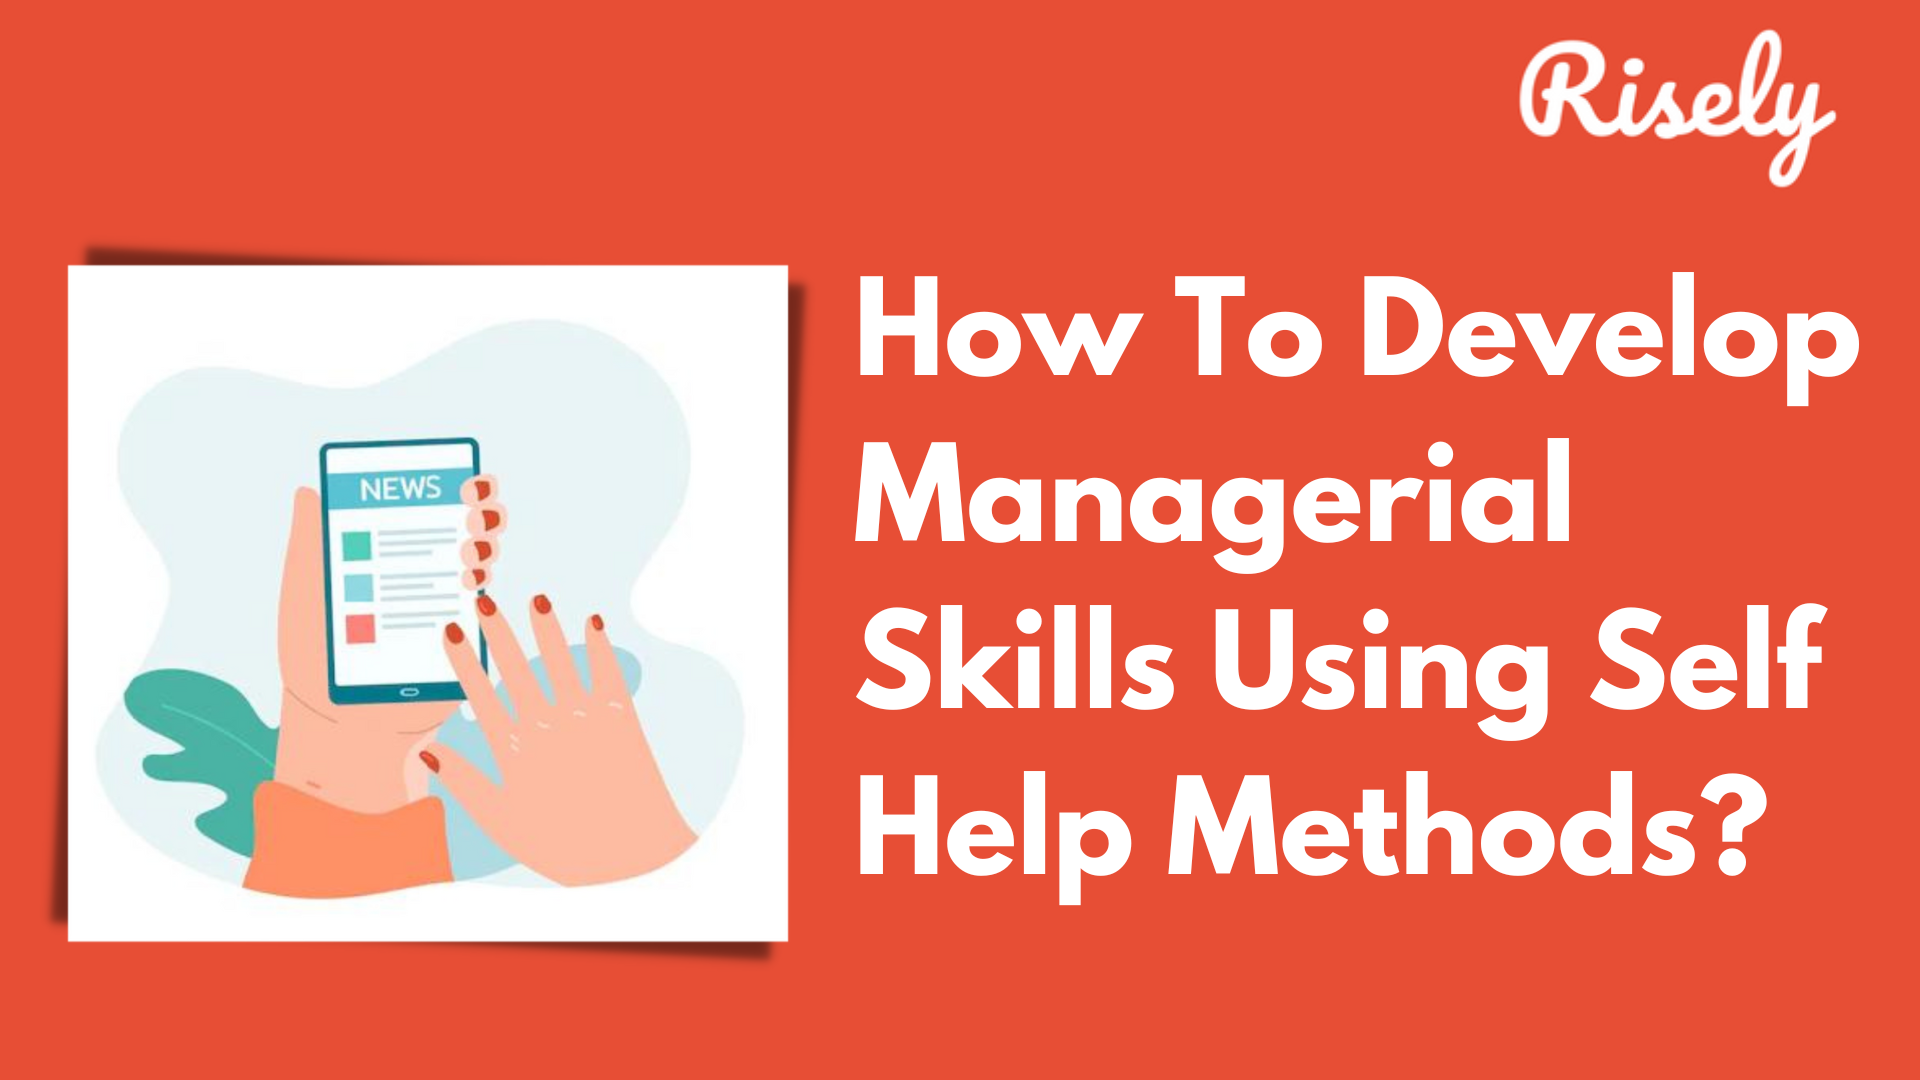 self-help methods to develop managerial skills